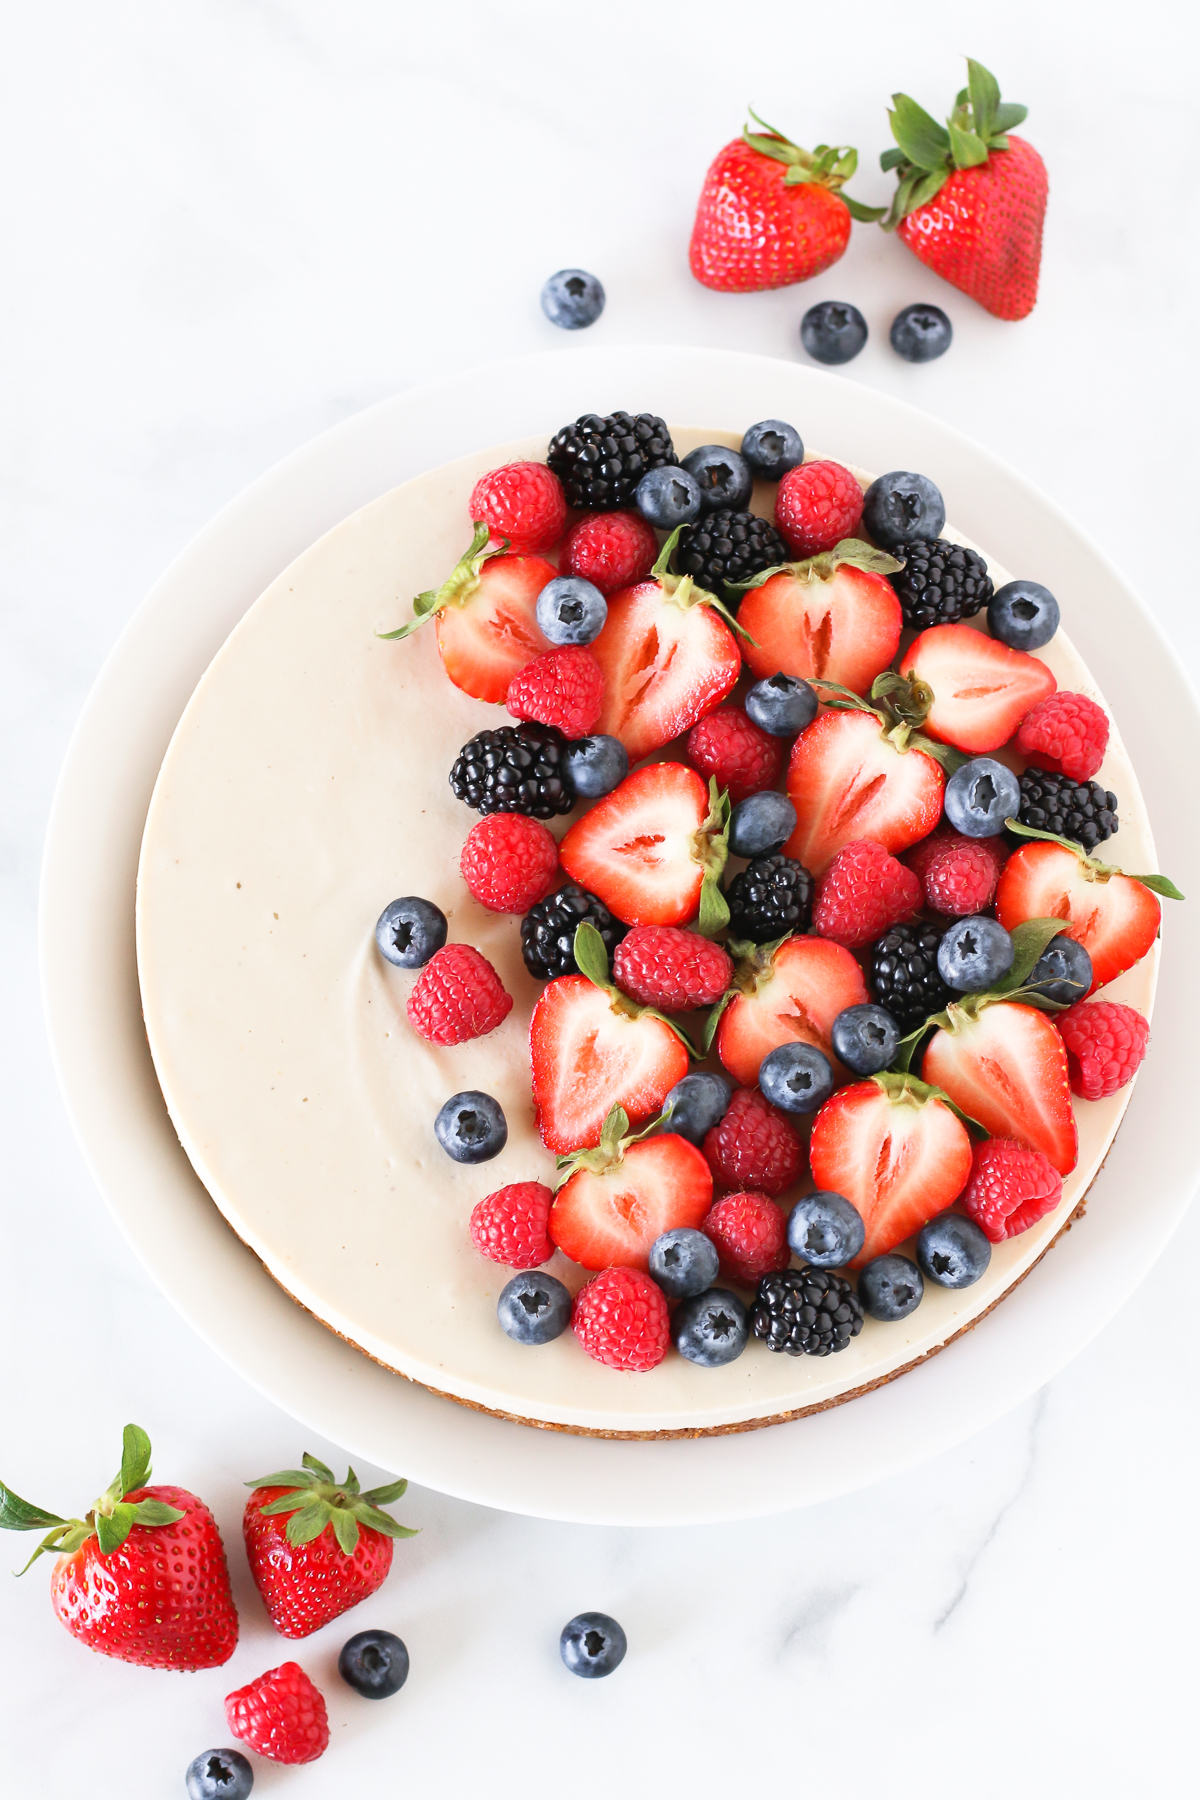 Gluten Free Vegan Berry Cheesecake. You will go head over heals for this dairy free cheesecake! Made with cashews, the creamy texture is perfectly paired with the fresh berries.